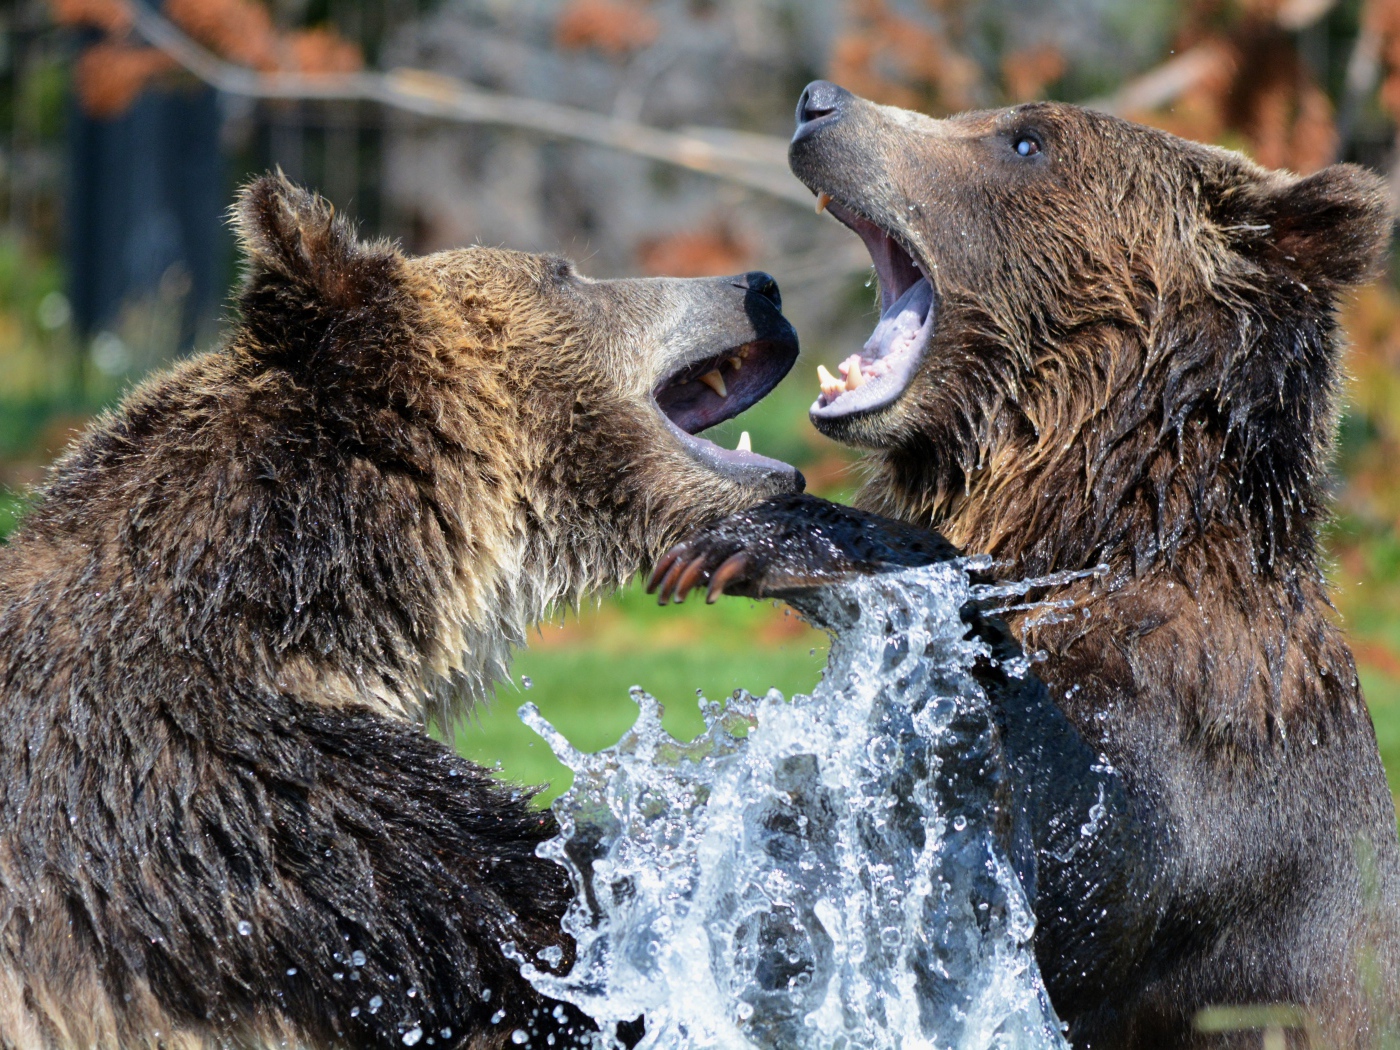 Two bears fighting in the water